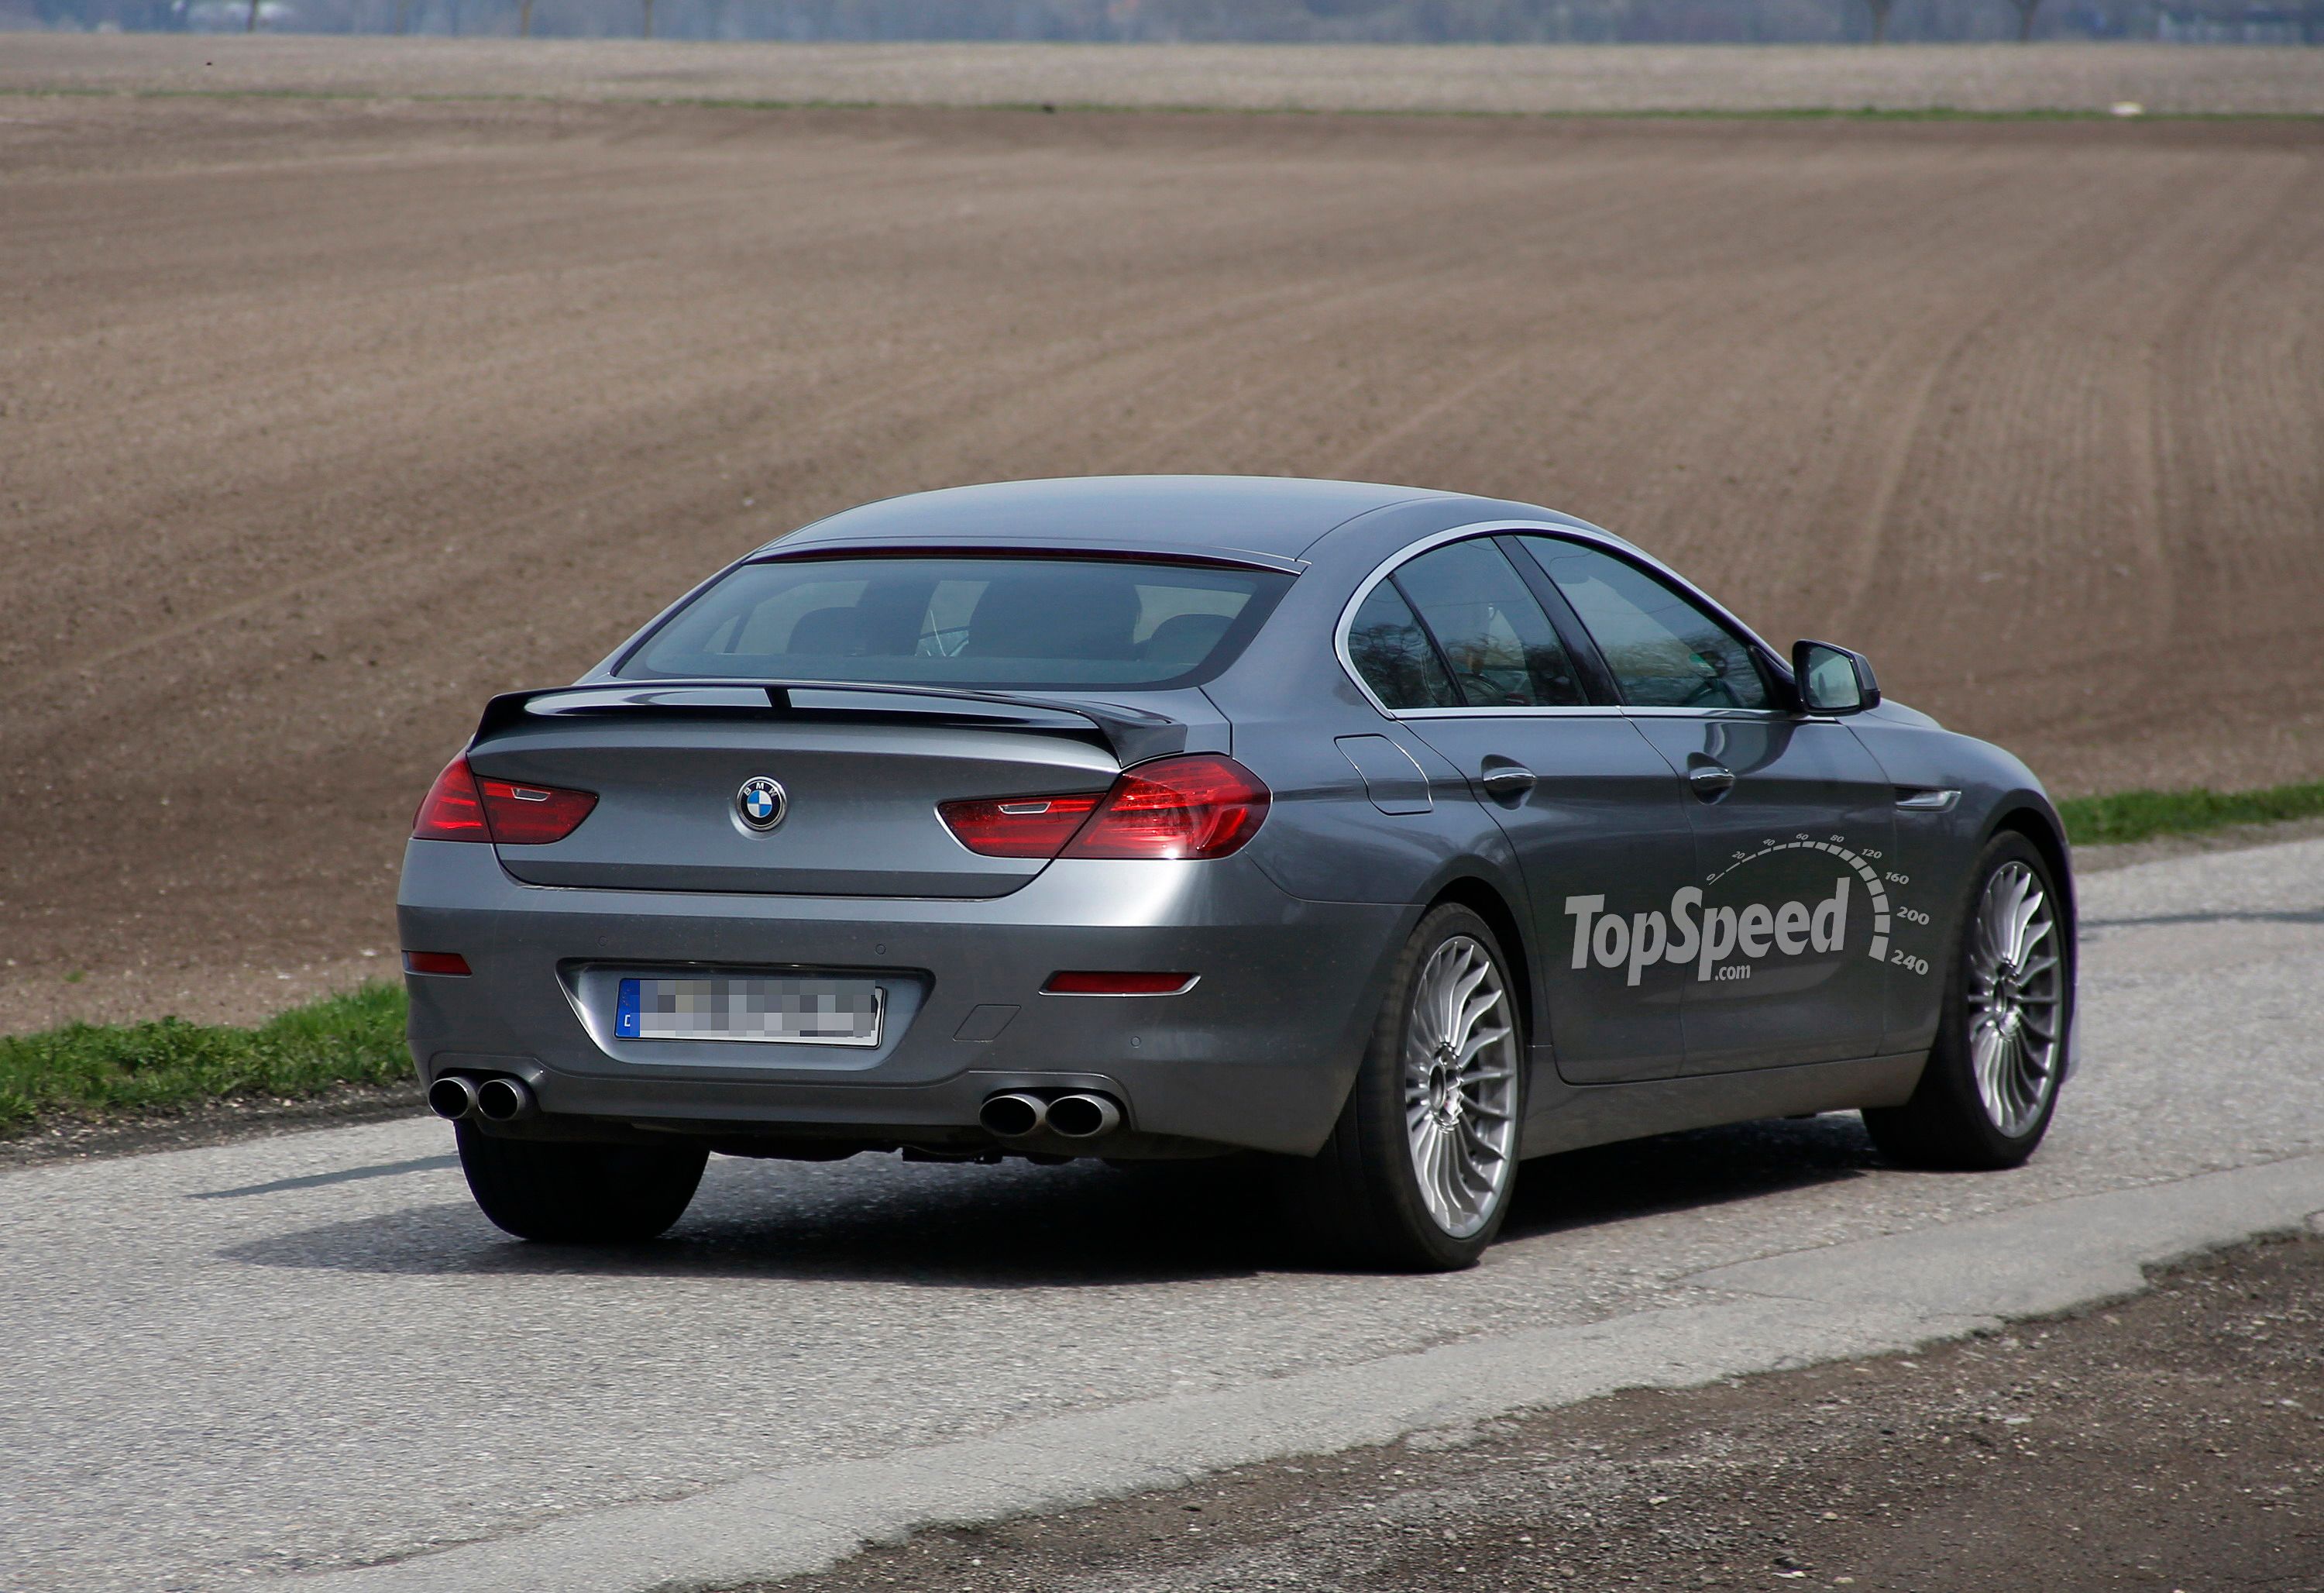 2014 BMW 6 Series GranCoupe by Alpina